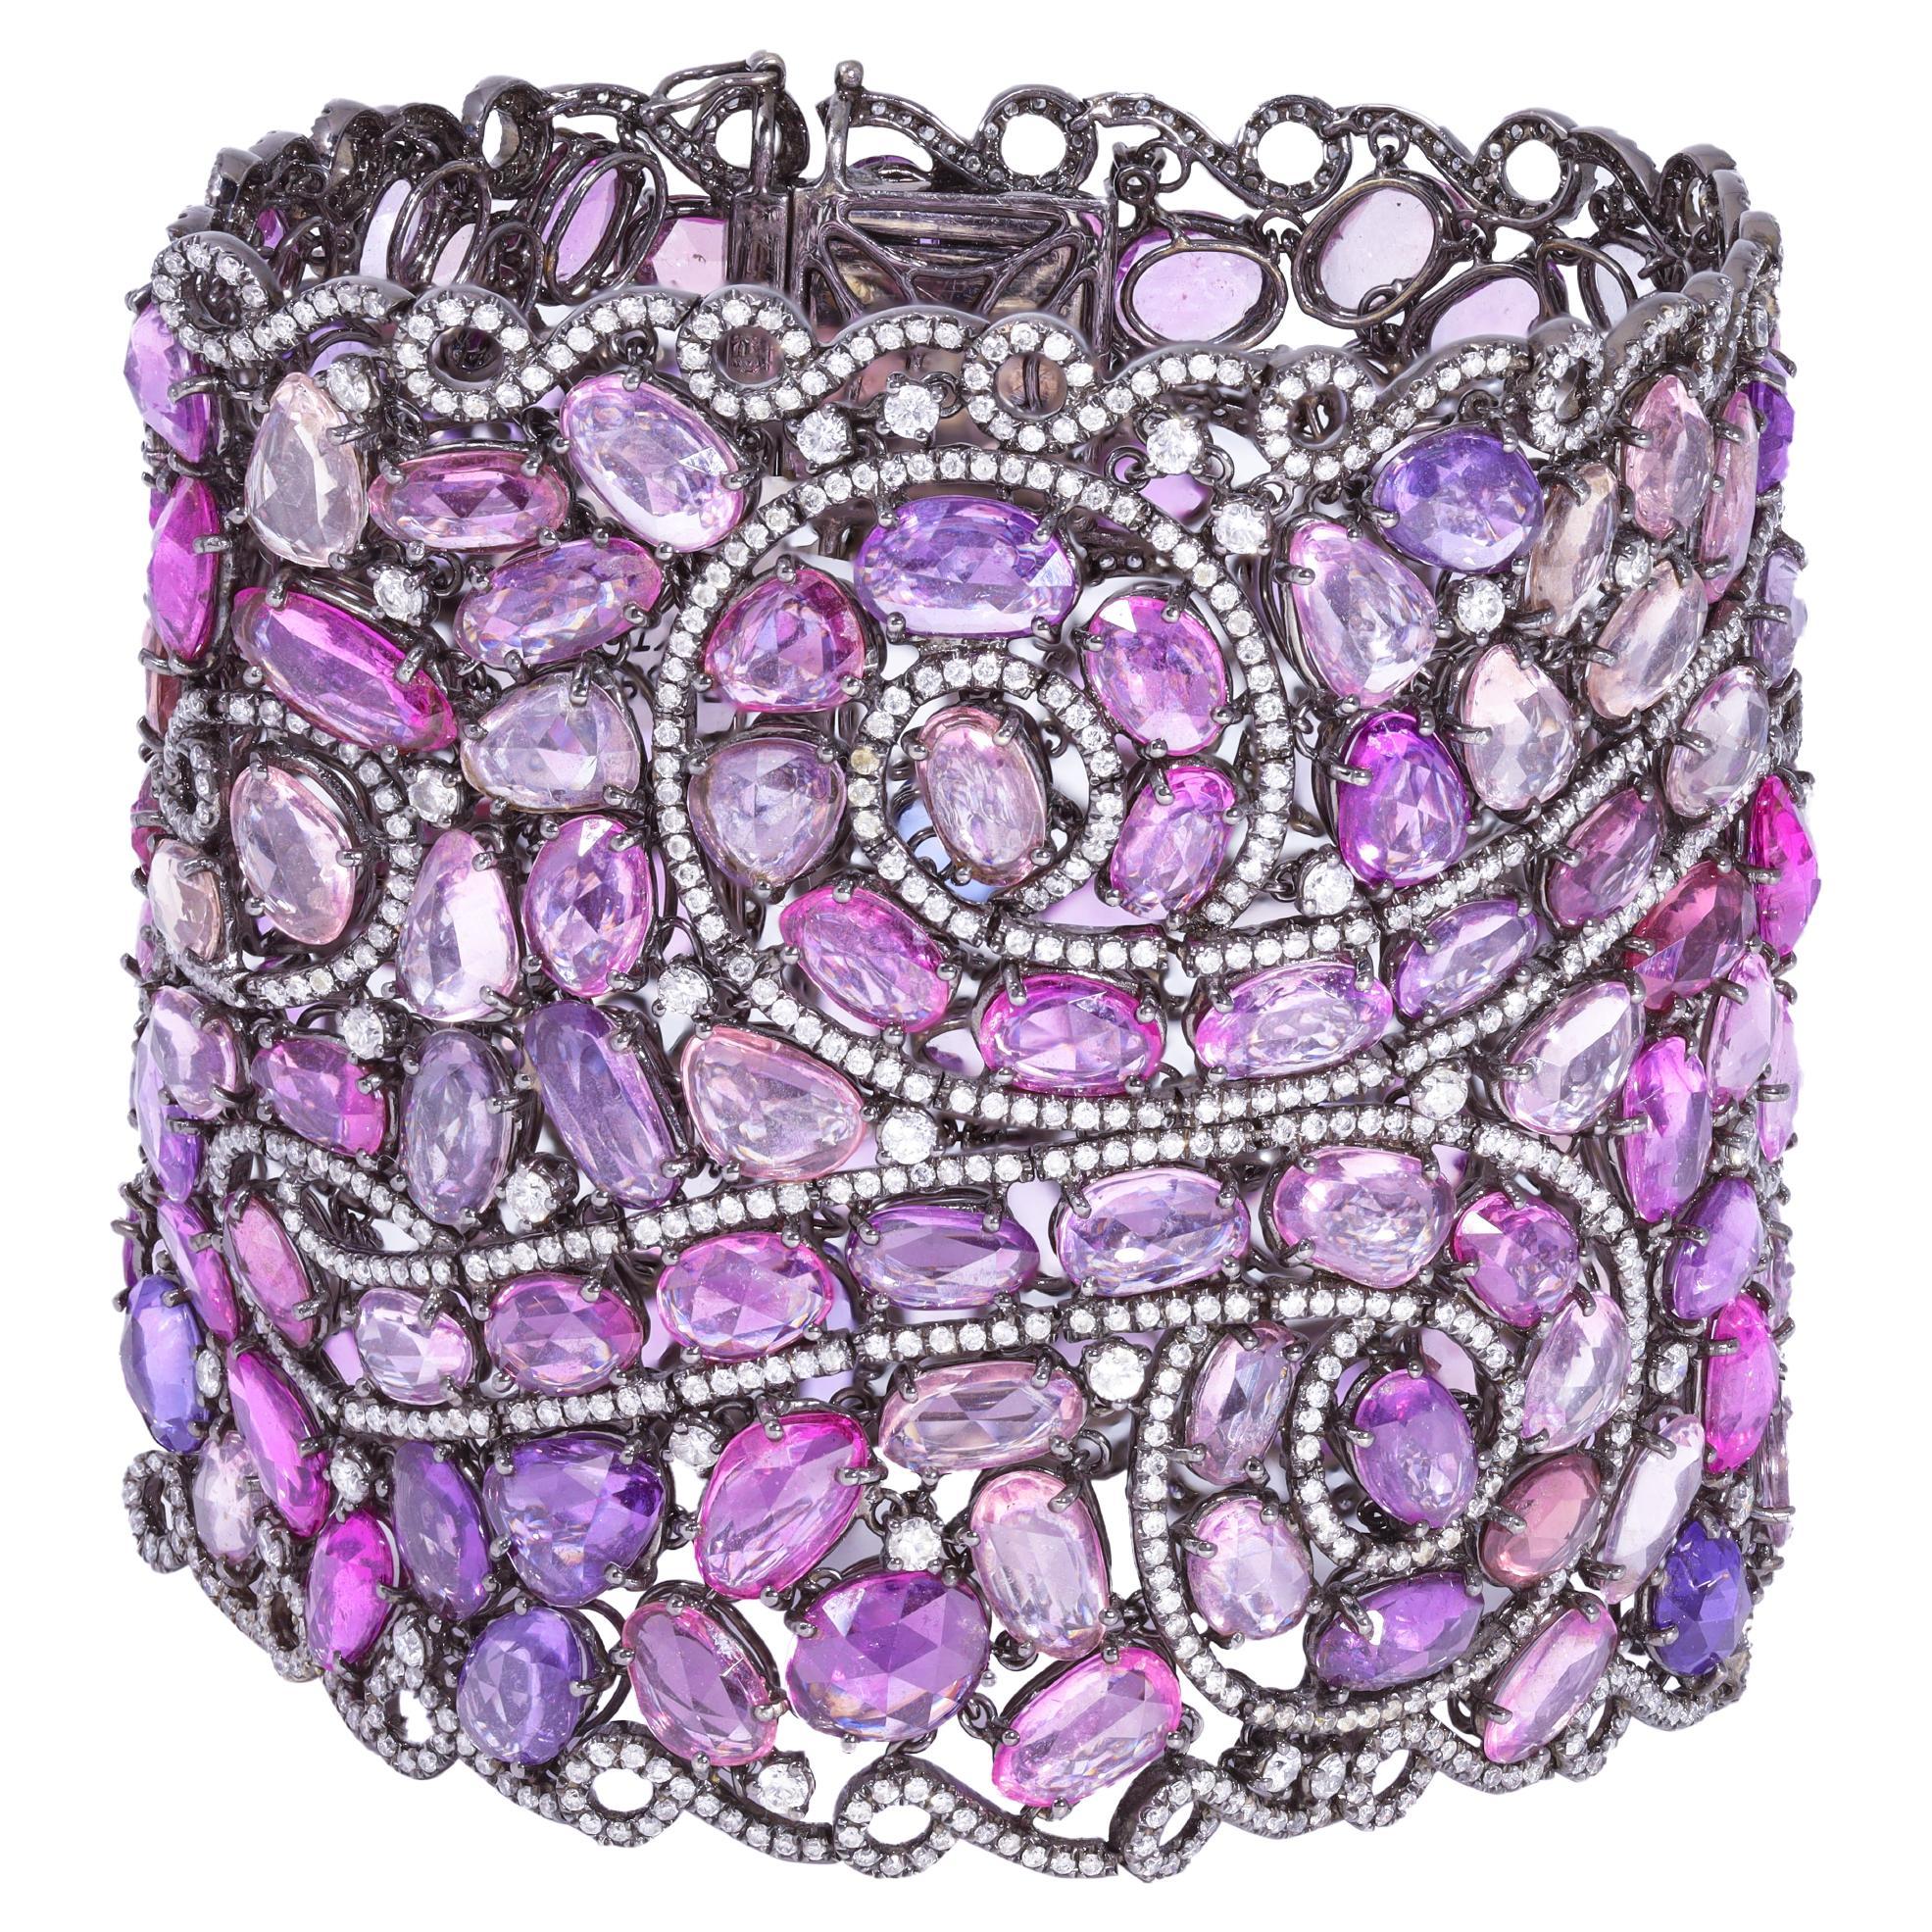 Diana M. 18kt white gold bracelet featuring 155.51cts of unheated pink sapphires For Sale